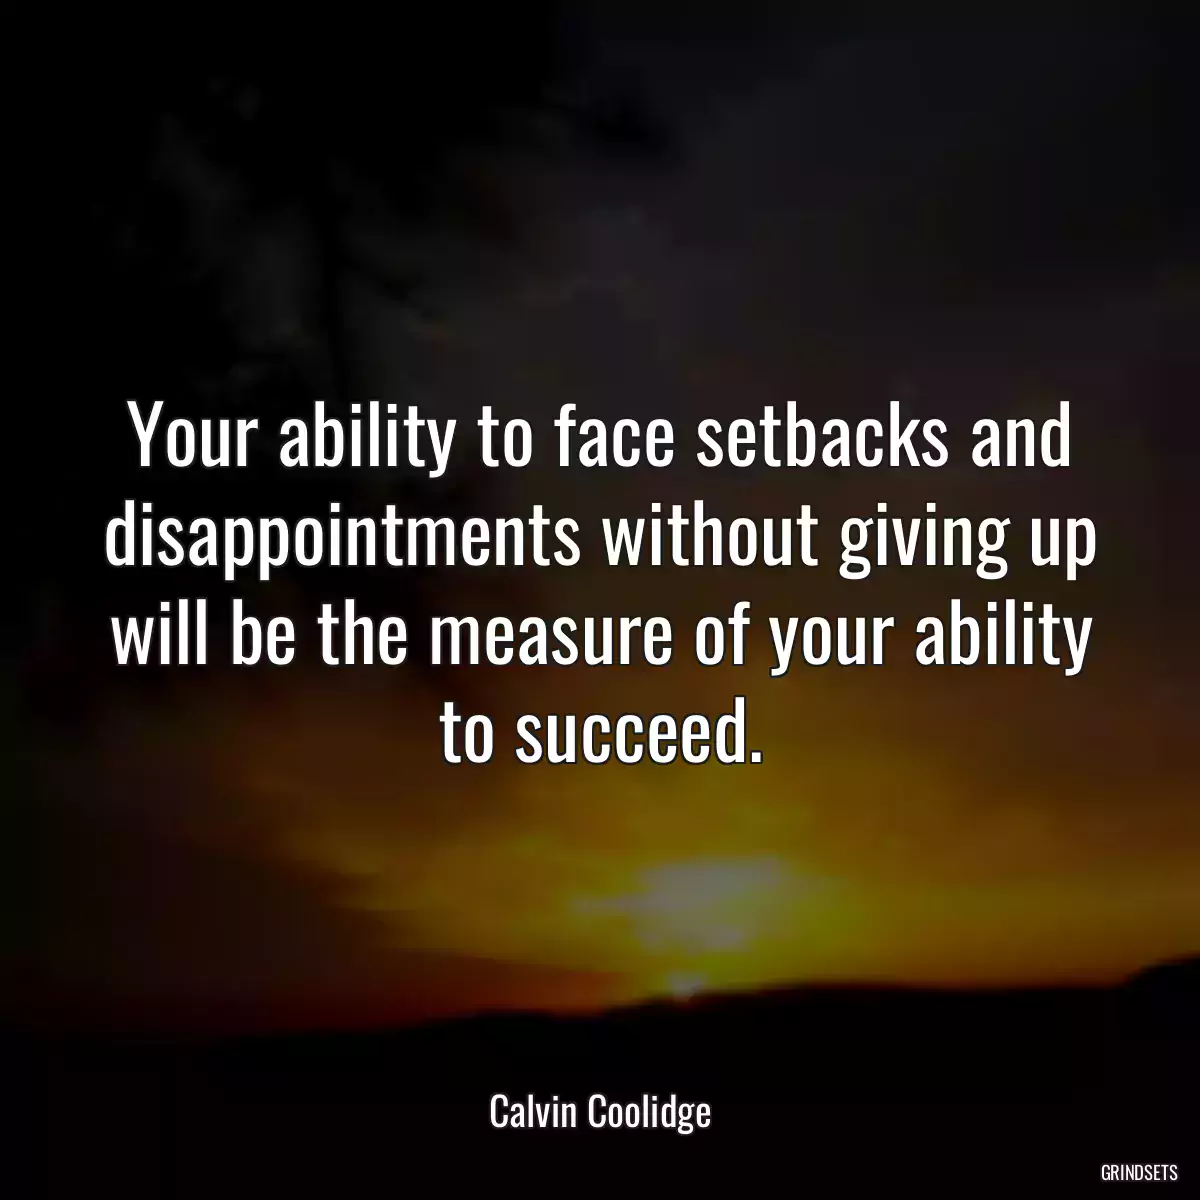 Your ability to face setbacks and disappointments without giving up will be the measure of your ability to succeed.